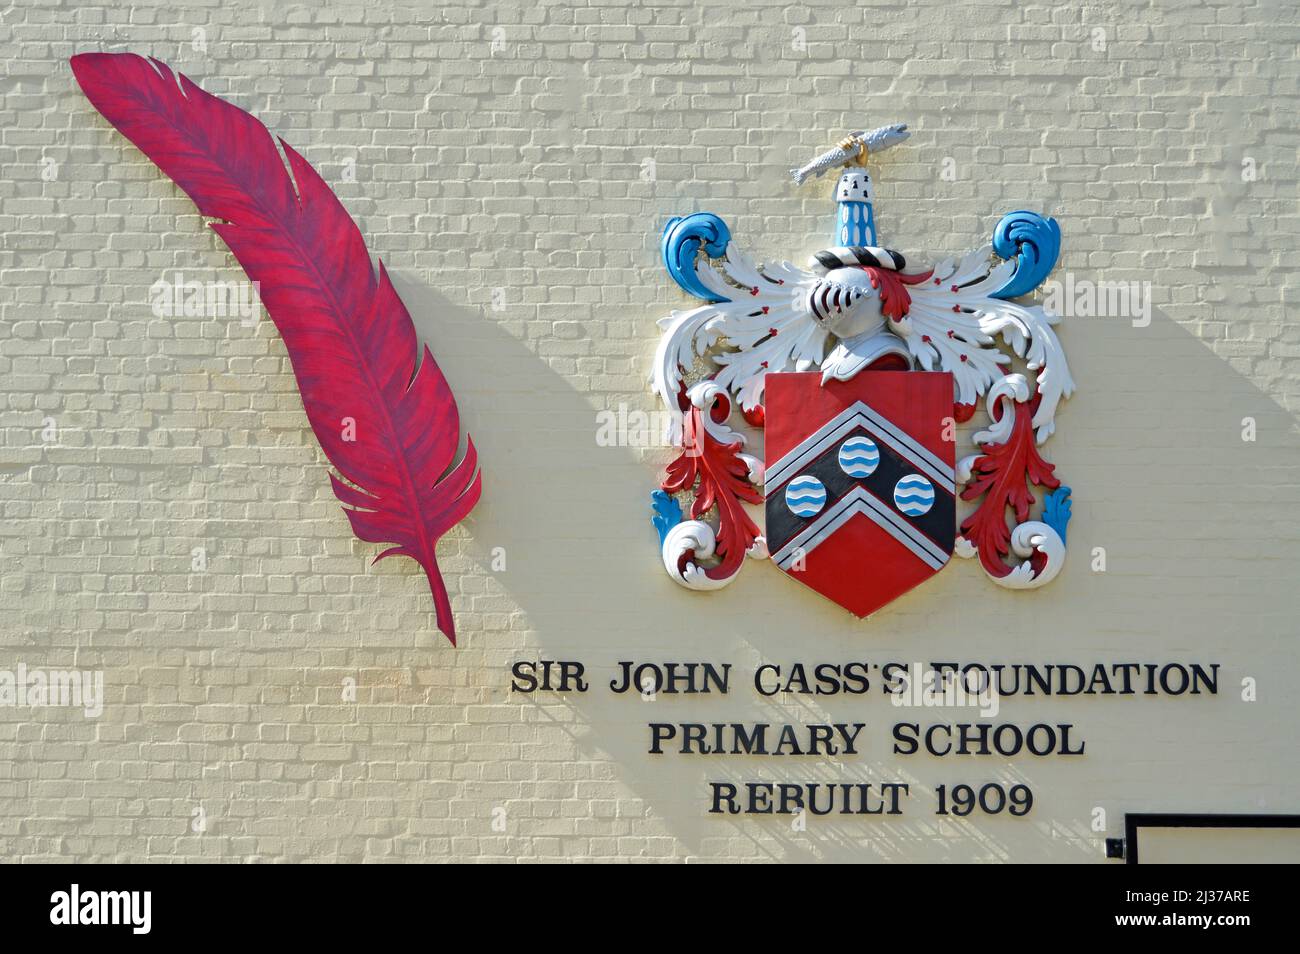 Coat of Arms of Sir John Cass's Foundation Primary School & symbolic red feather linked to John Cass an education benefactor to this day in London UK Stock Photo